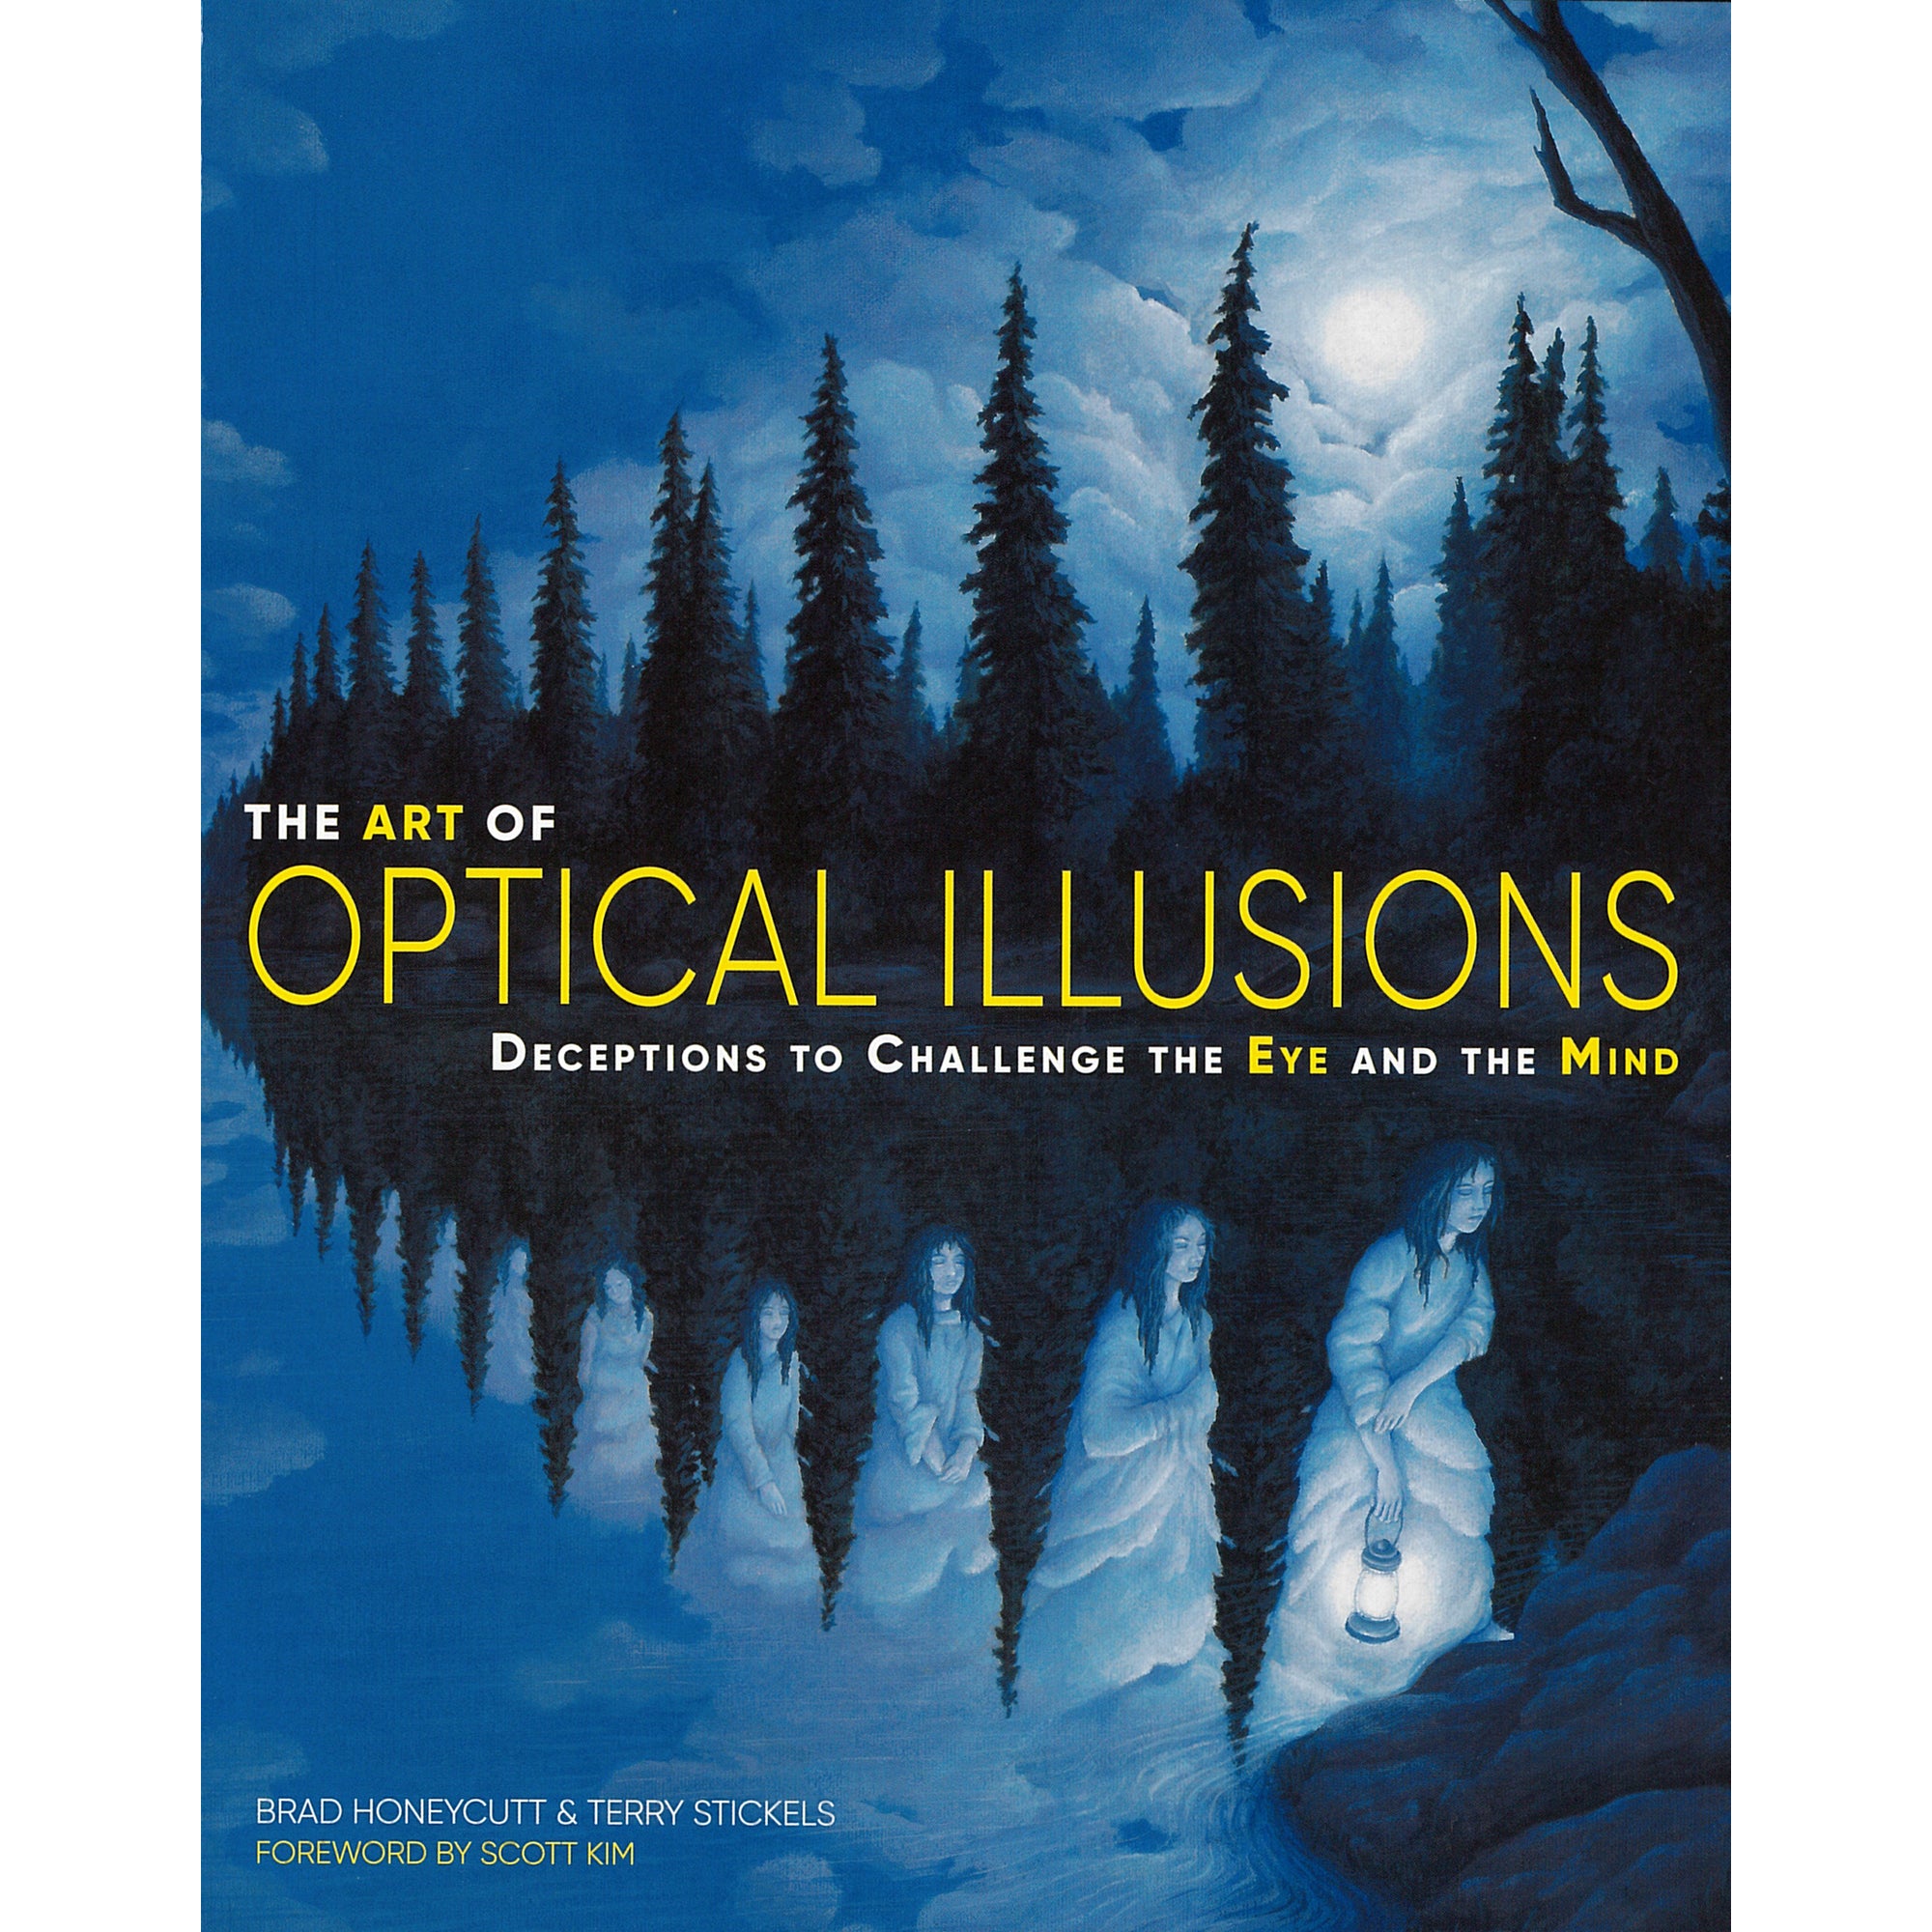 The Art of Optical Illusions book cover